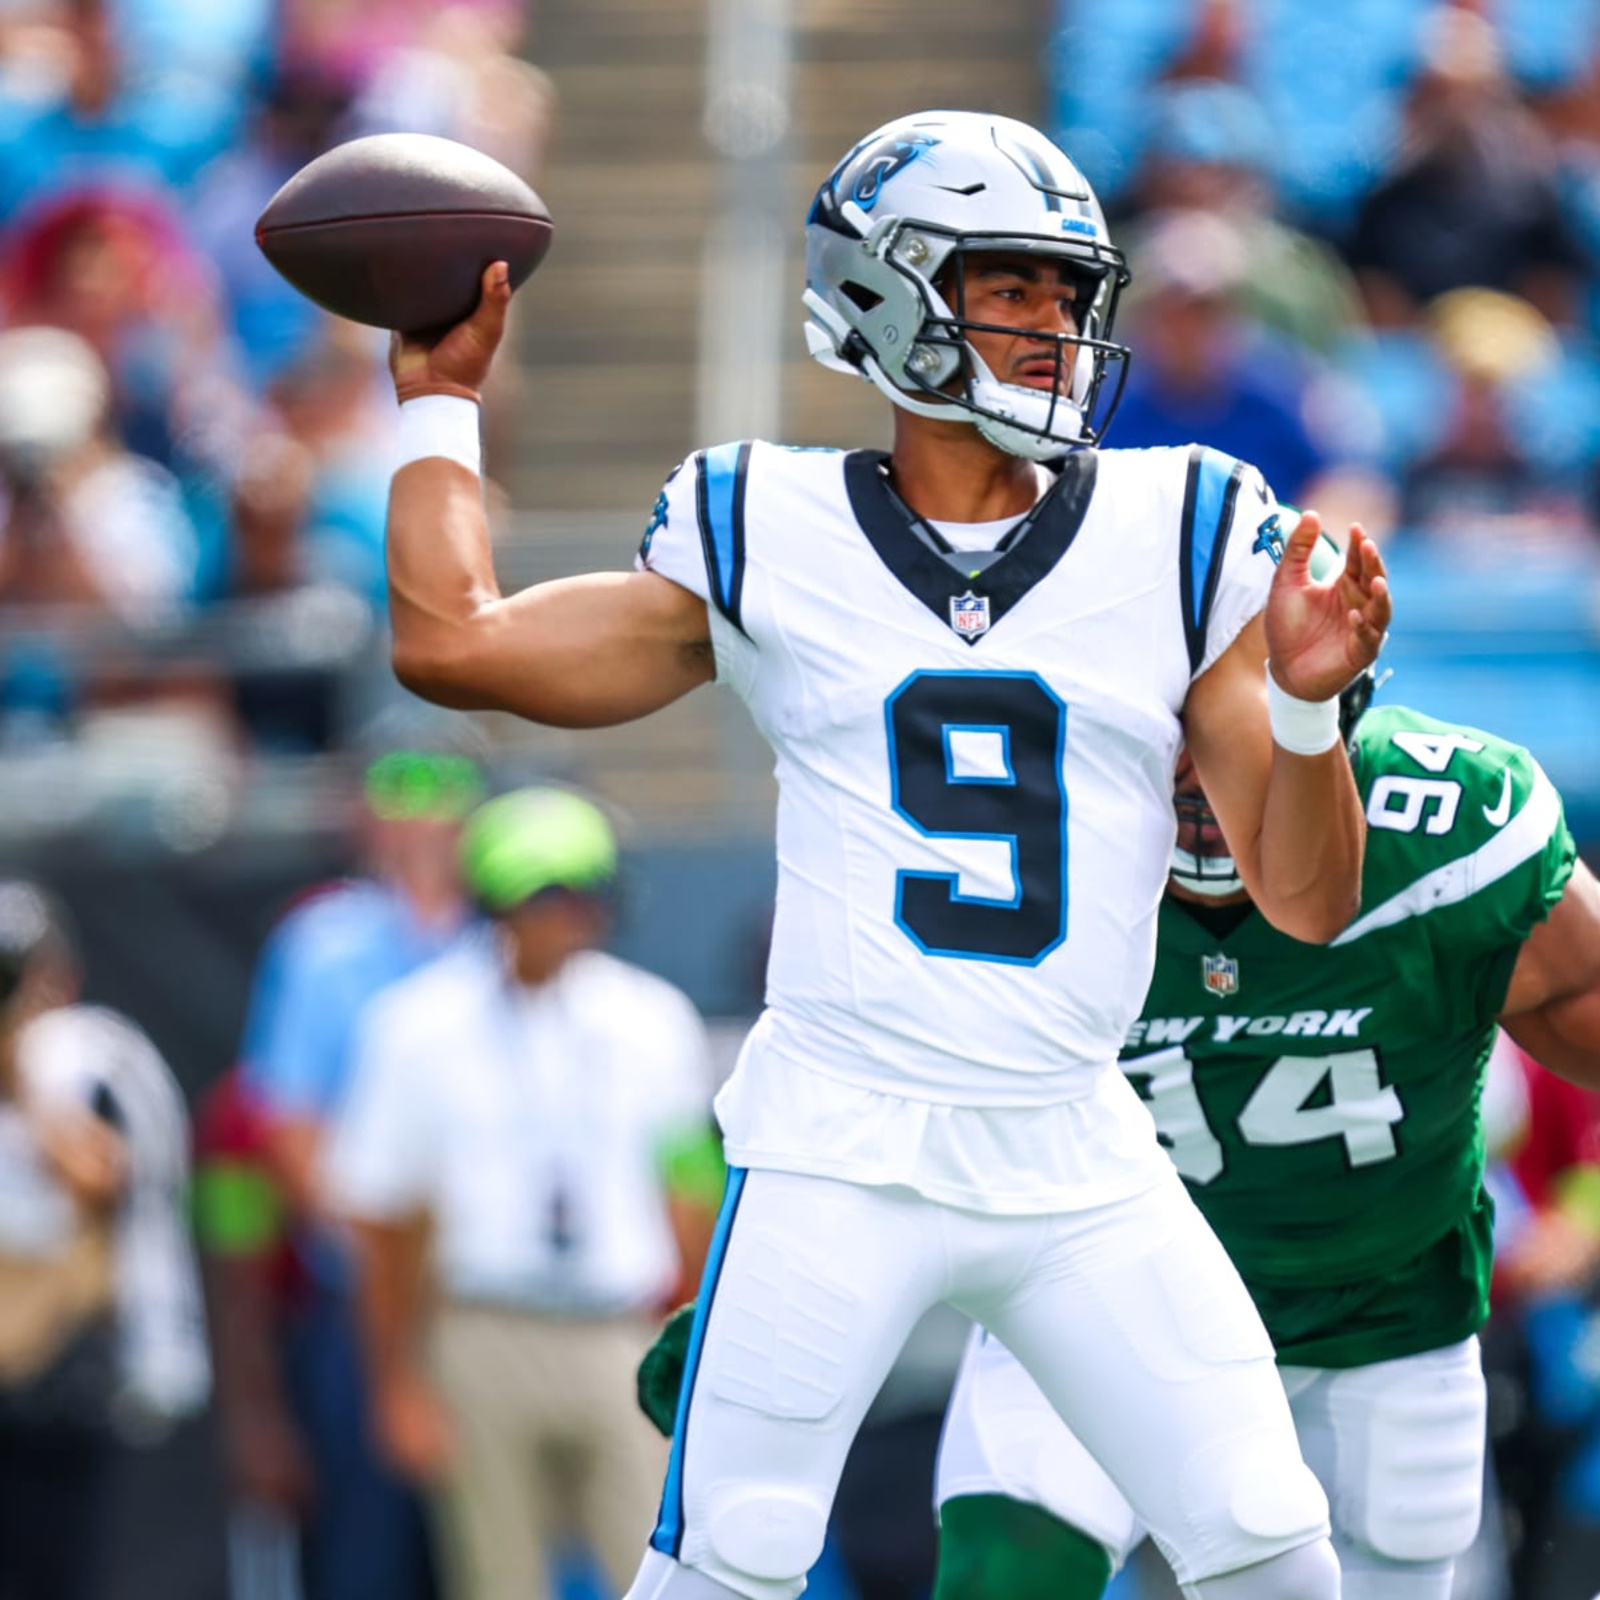 Top 10 Fantasy Football Rookie Sleepers for 2022 - The Athletes Hub